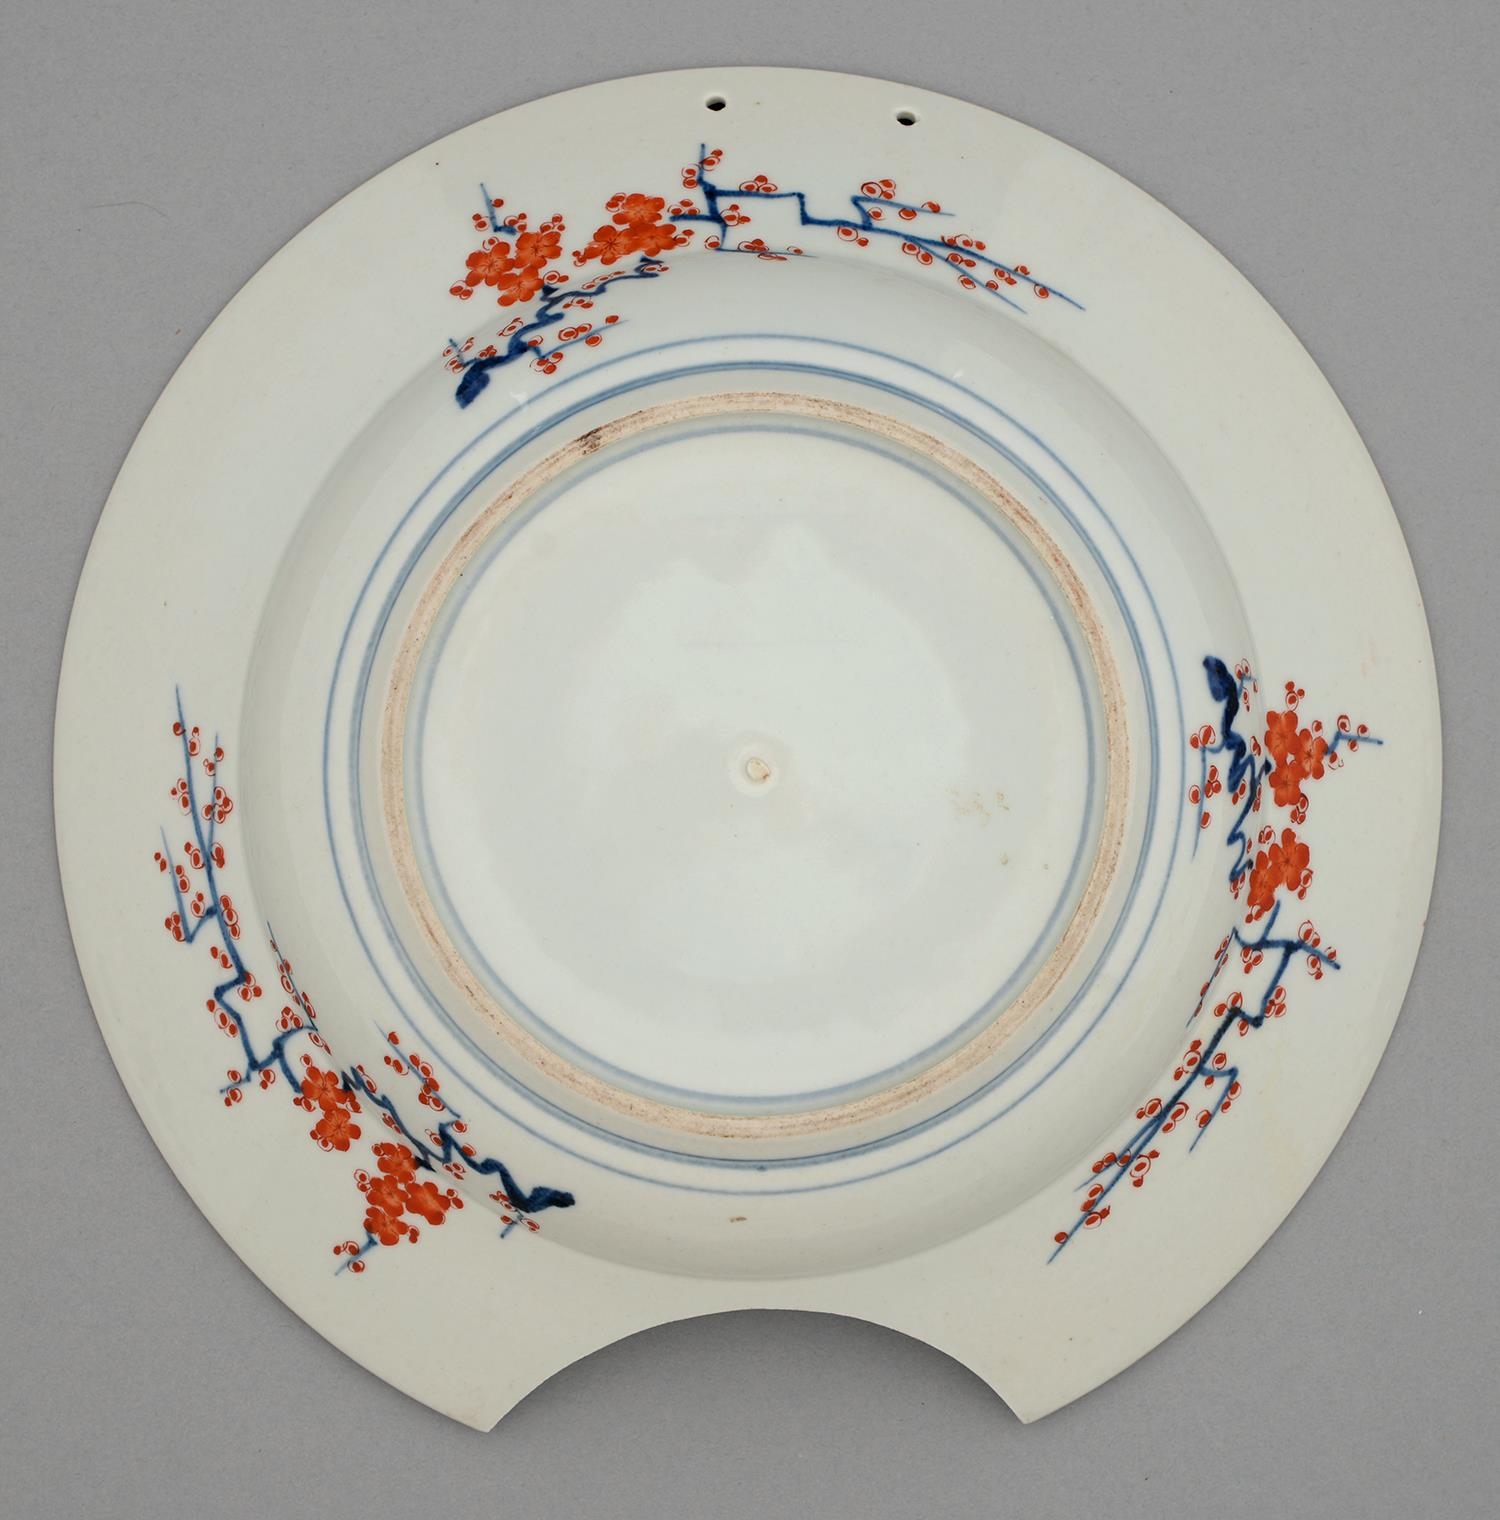 An Imari barber's bowl, Edo period, 18th / 19th c, painted in underglaze blue and enamelled in red - Image 2 of 2